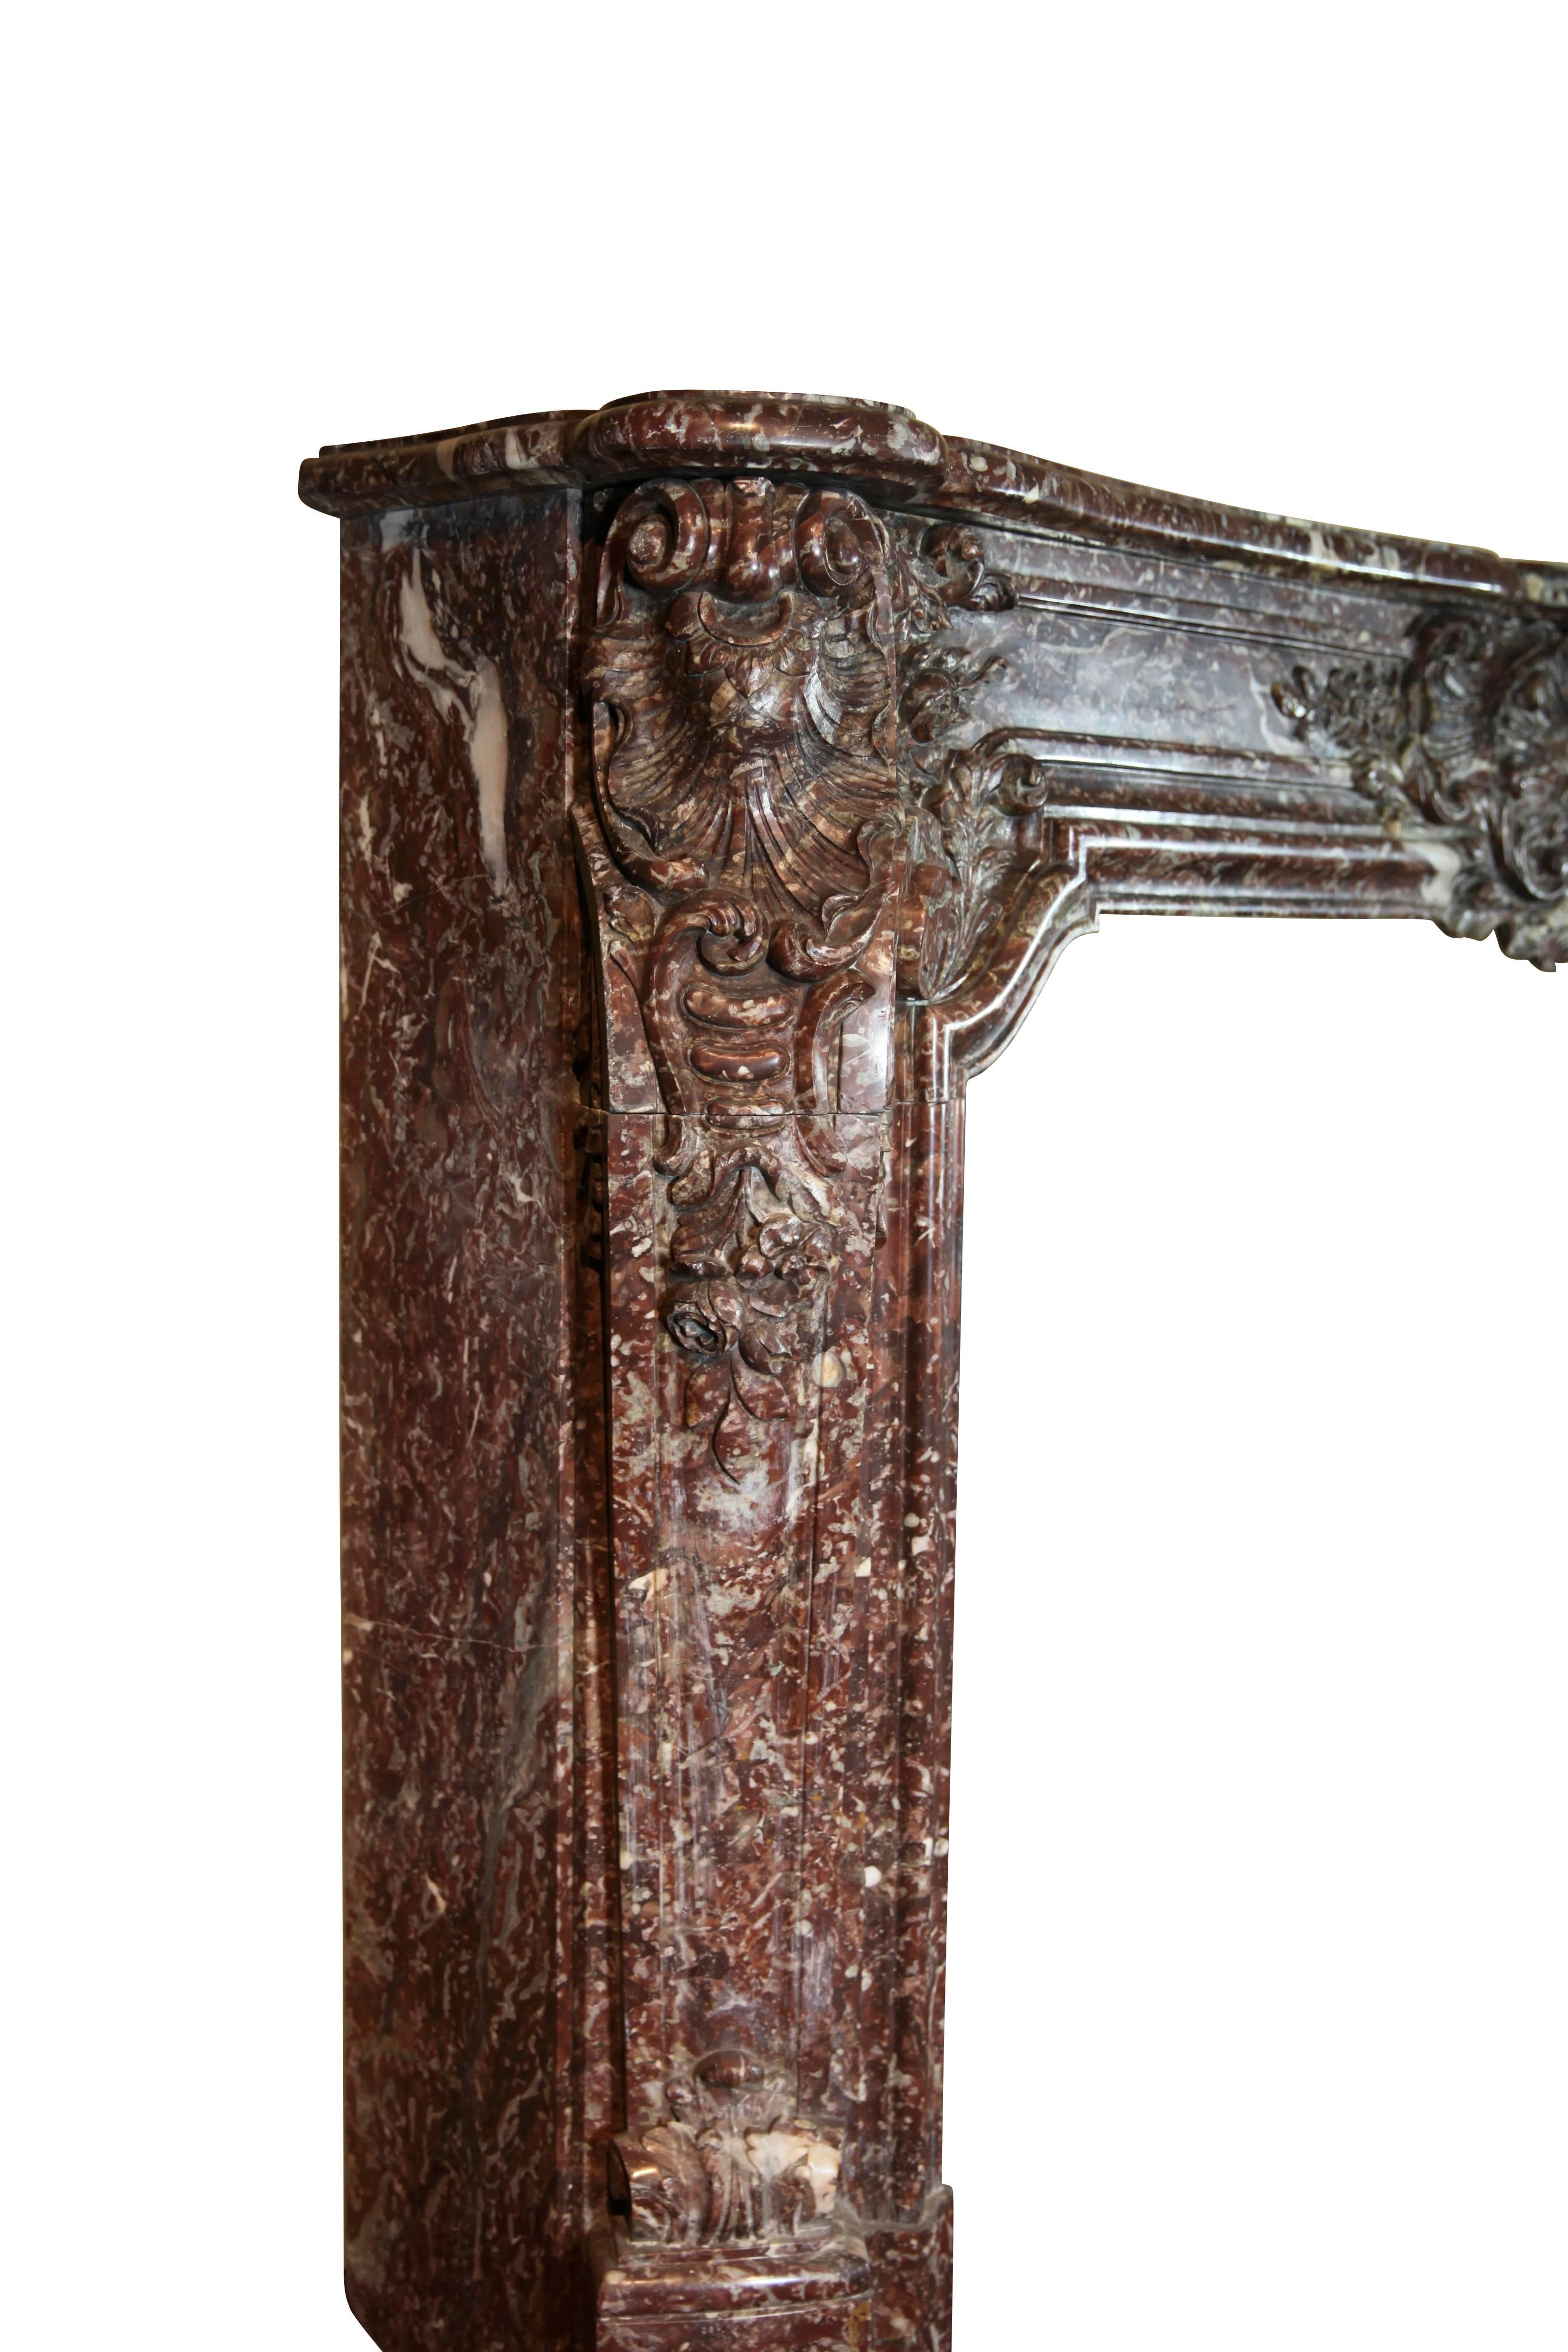 This is a massive, grand, original antique fireplace mantel (fireplace) made in the Belgian Marble de Rochefort, affiliated with abbey de Rochefort, well known for its famous Belgian Beer. It is an exceptional chimney piece from a Belgian palace.